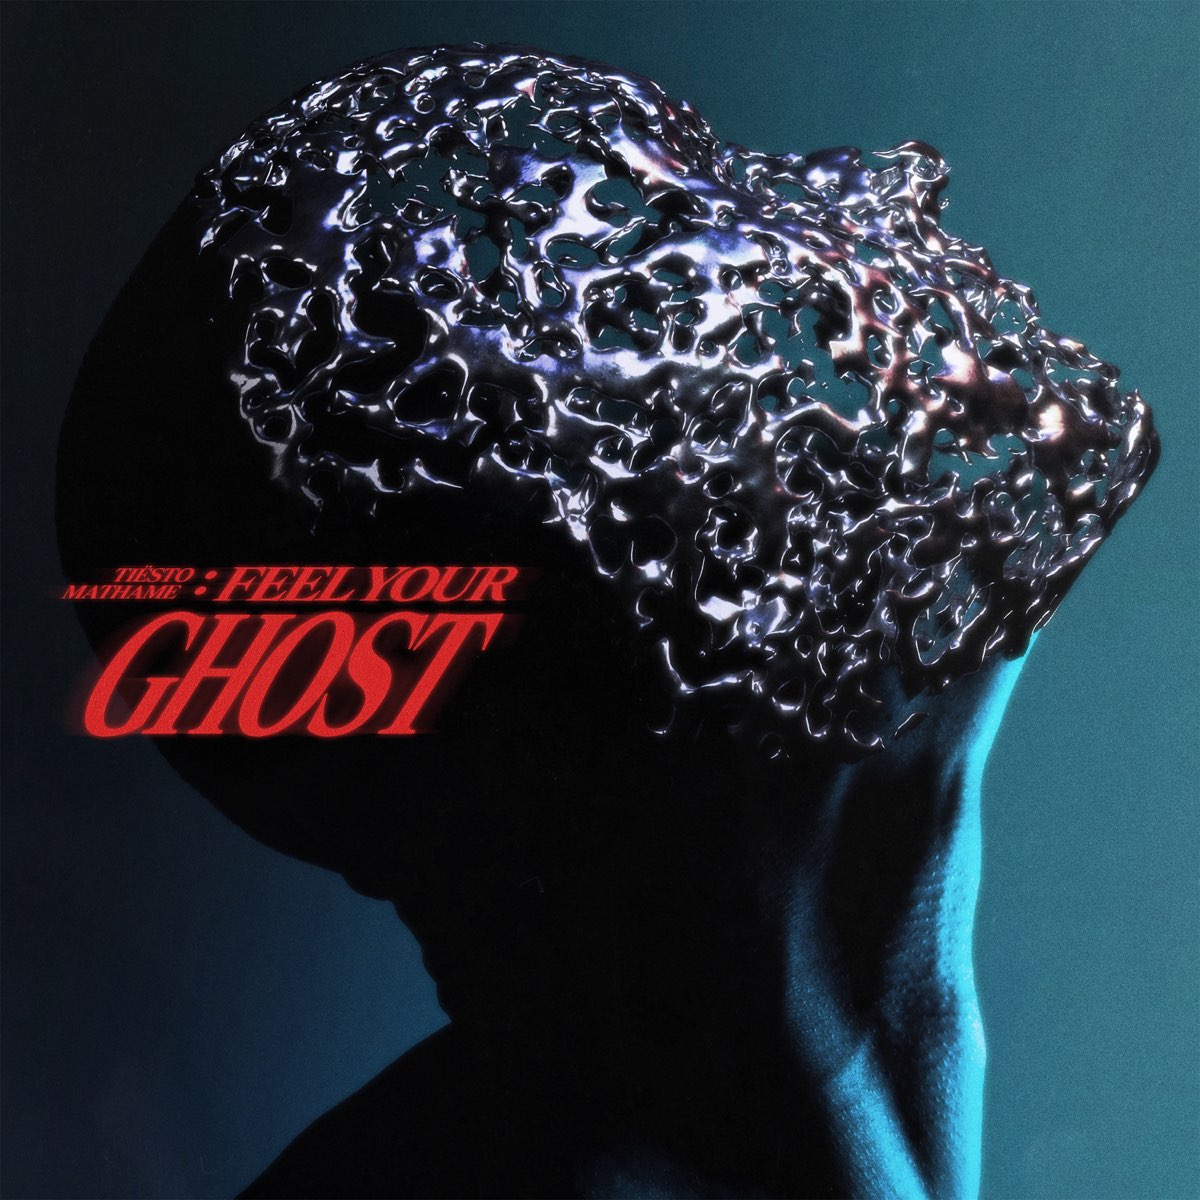 Tiësto & Mathame Feel Your Ghost cover artwork